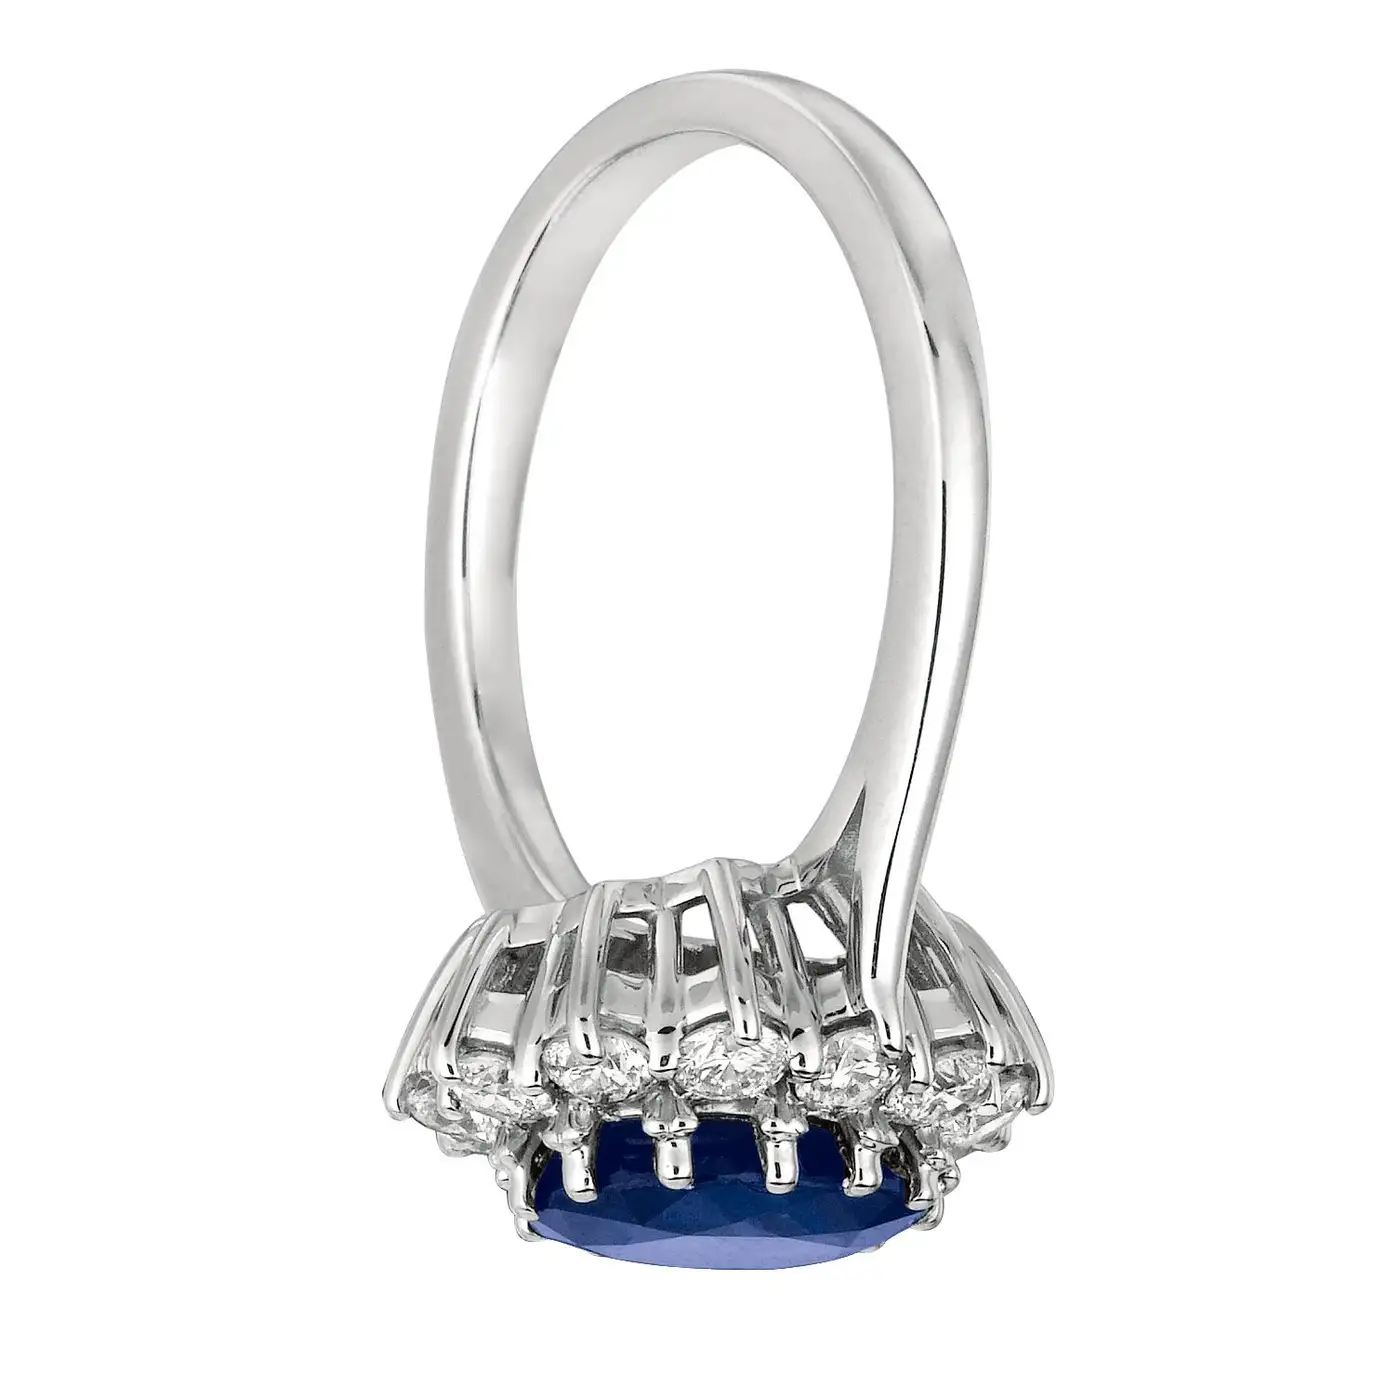 Princess-Diana-Inspired-3.55-Carat-Oval-Sapphire-and-Diamond-Ring-14K-White-Gold-2.webp